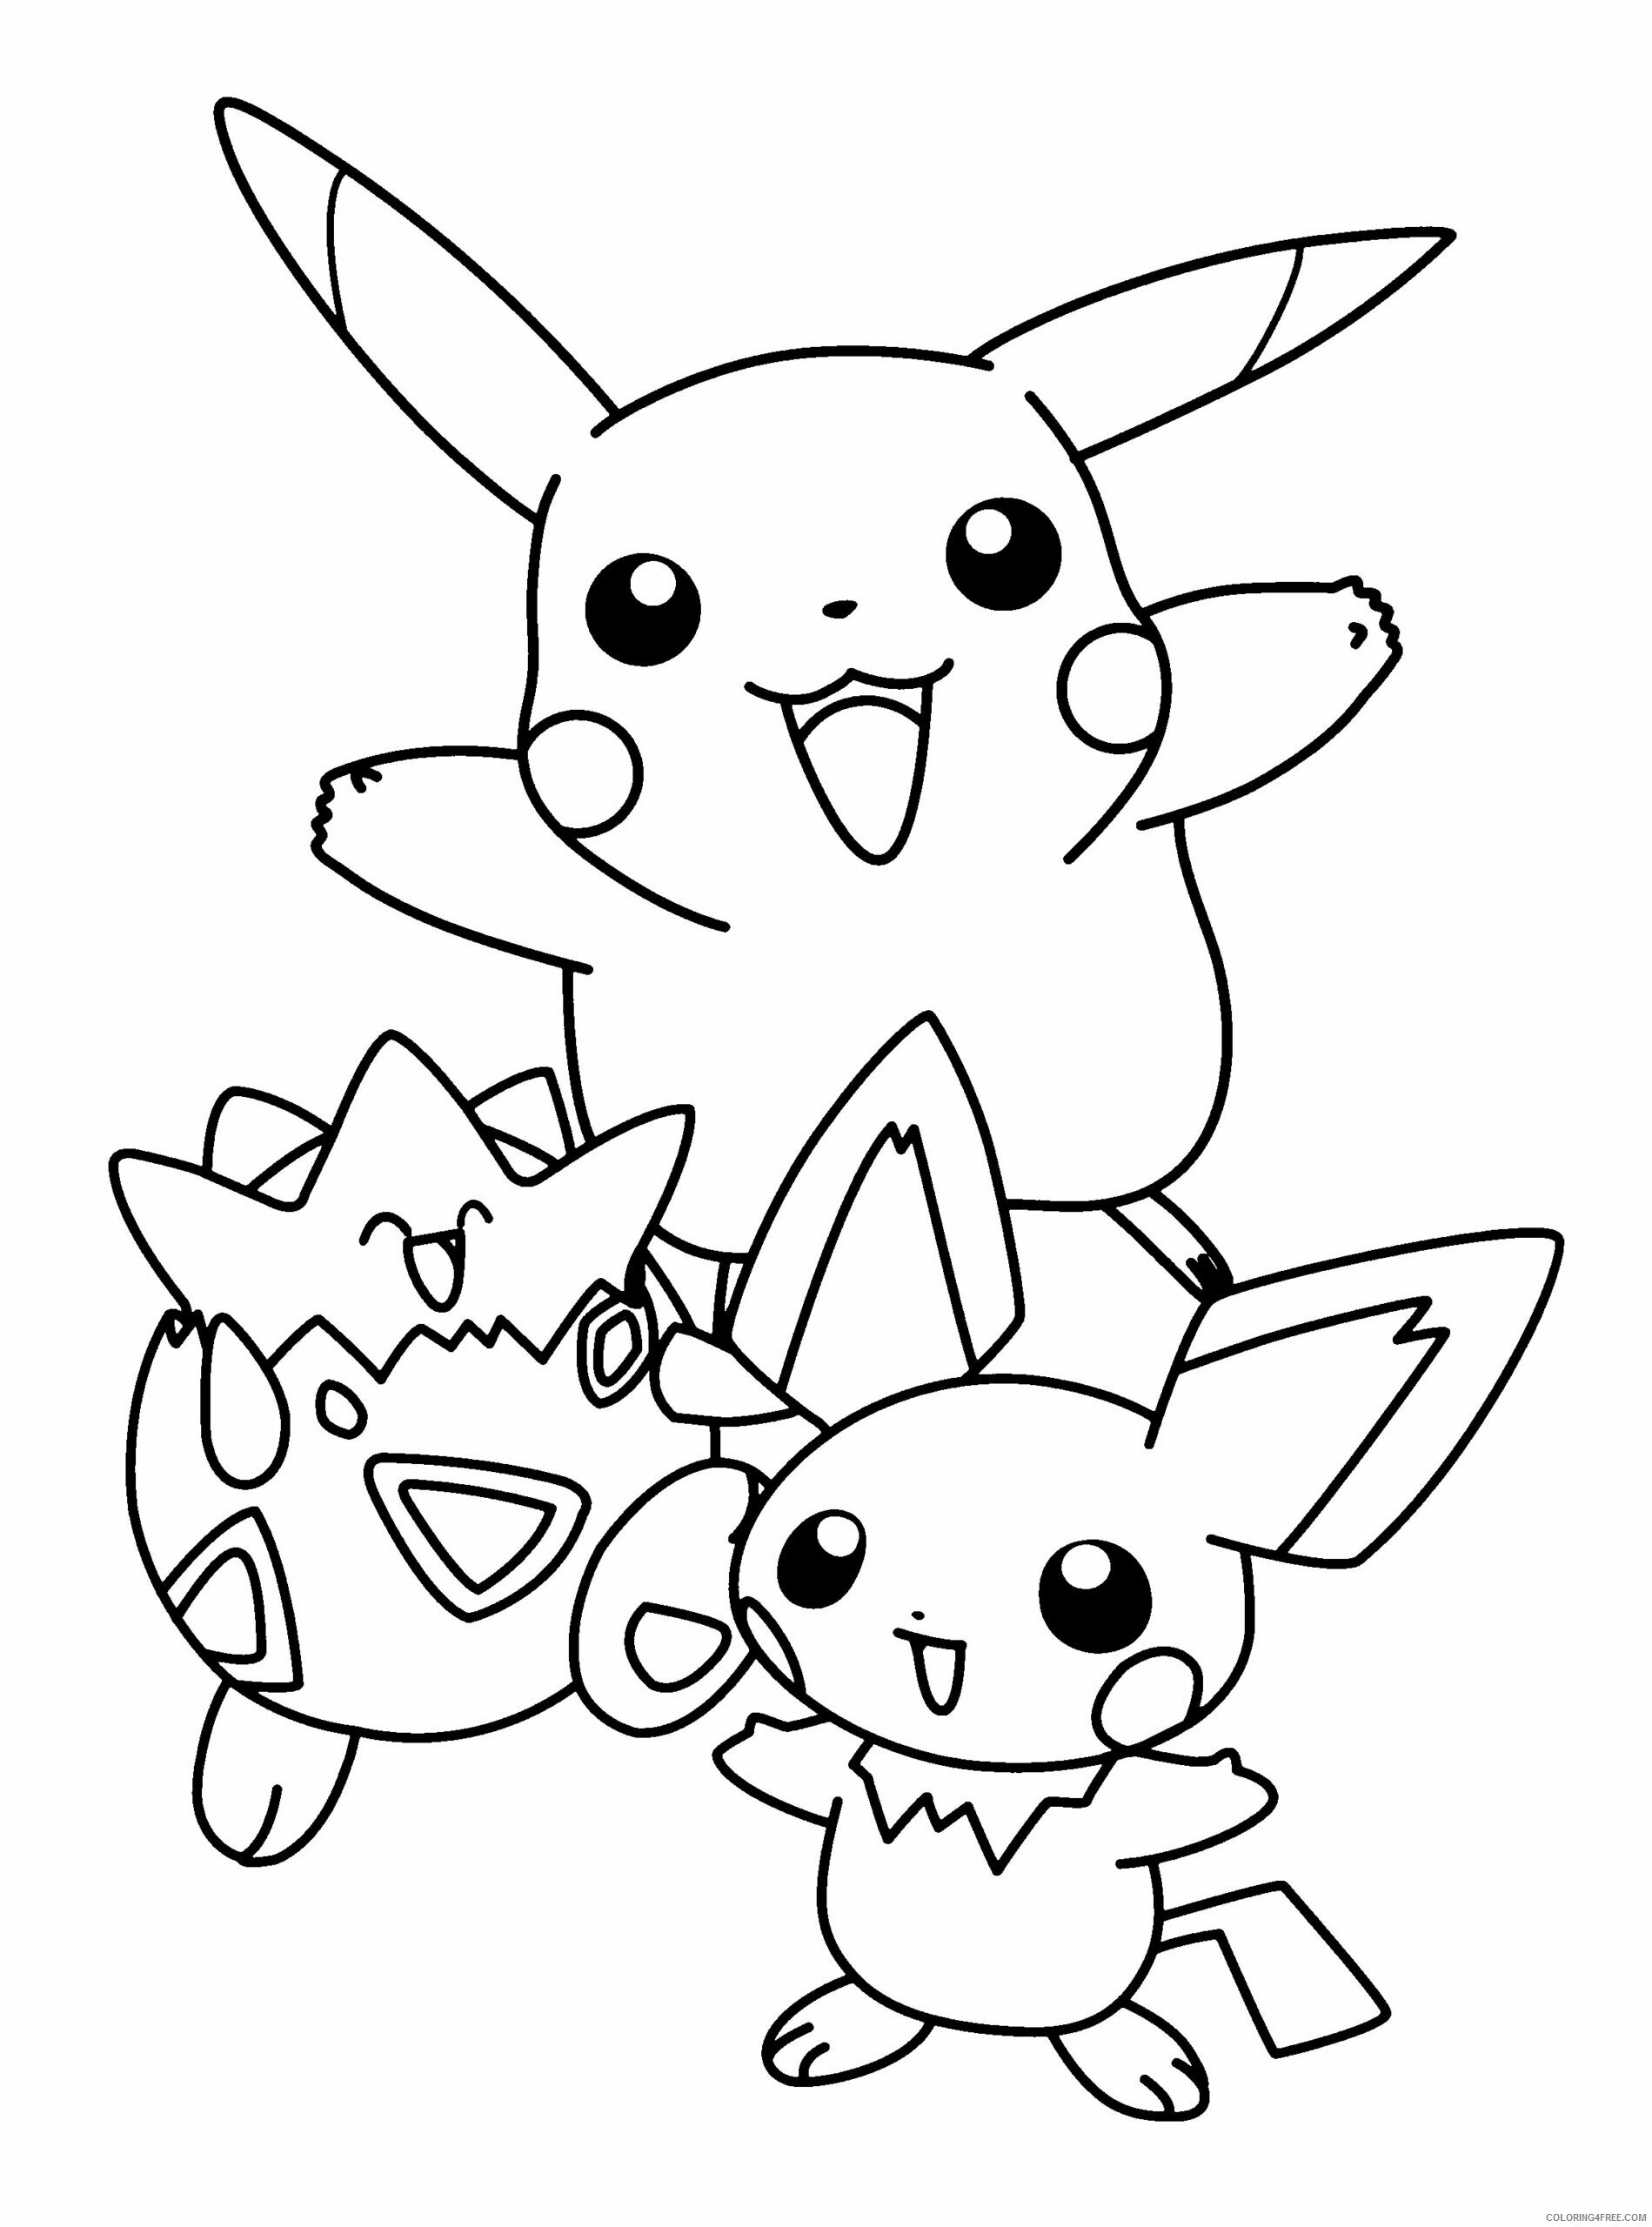 Pikachu Printable Coloring Pages Anime Pokemon Pikachu and friends 2021 0962 Coloring4free